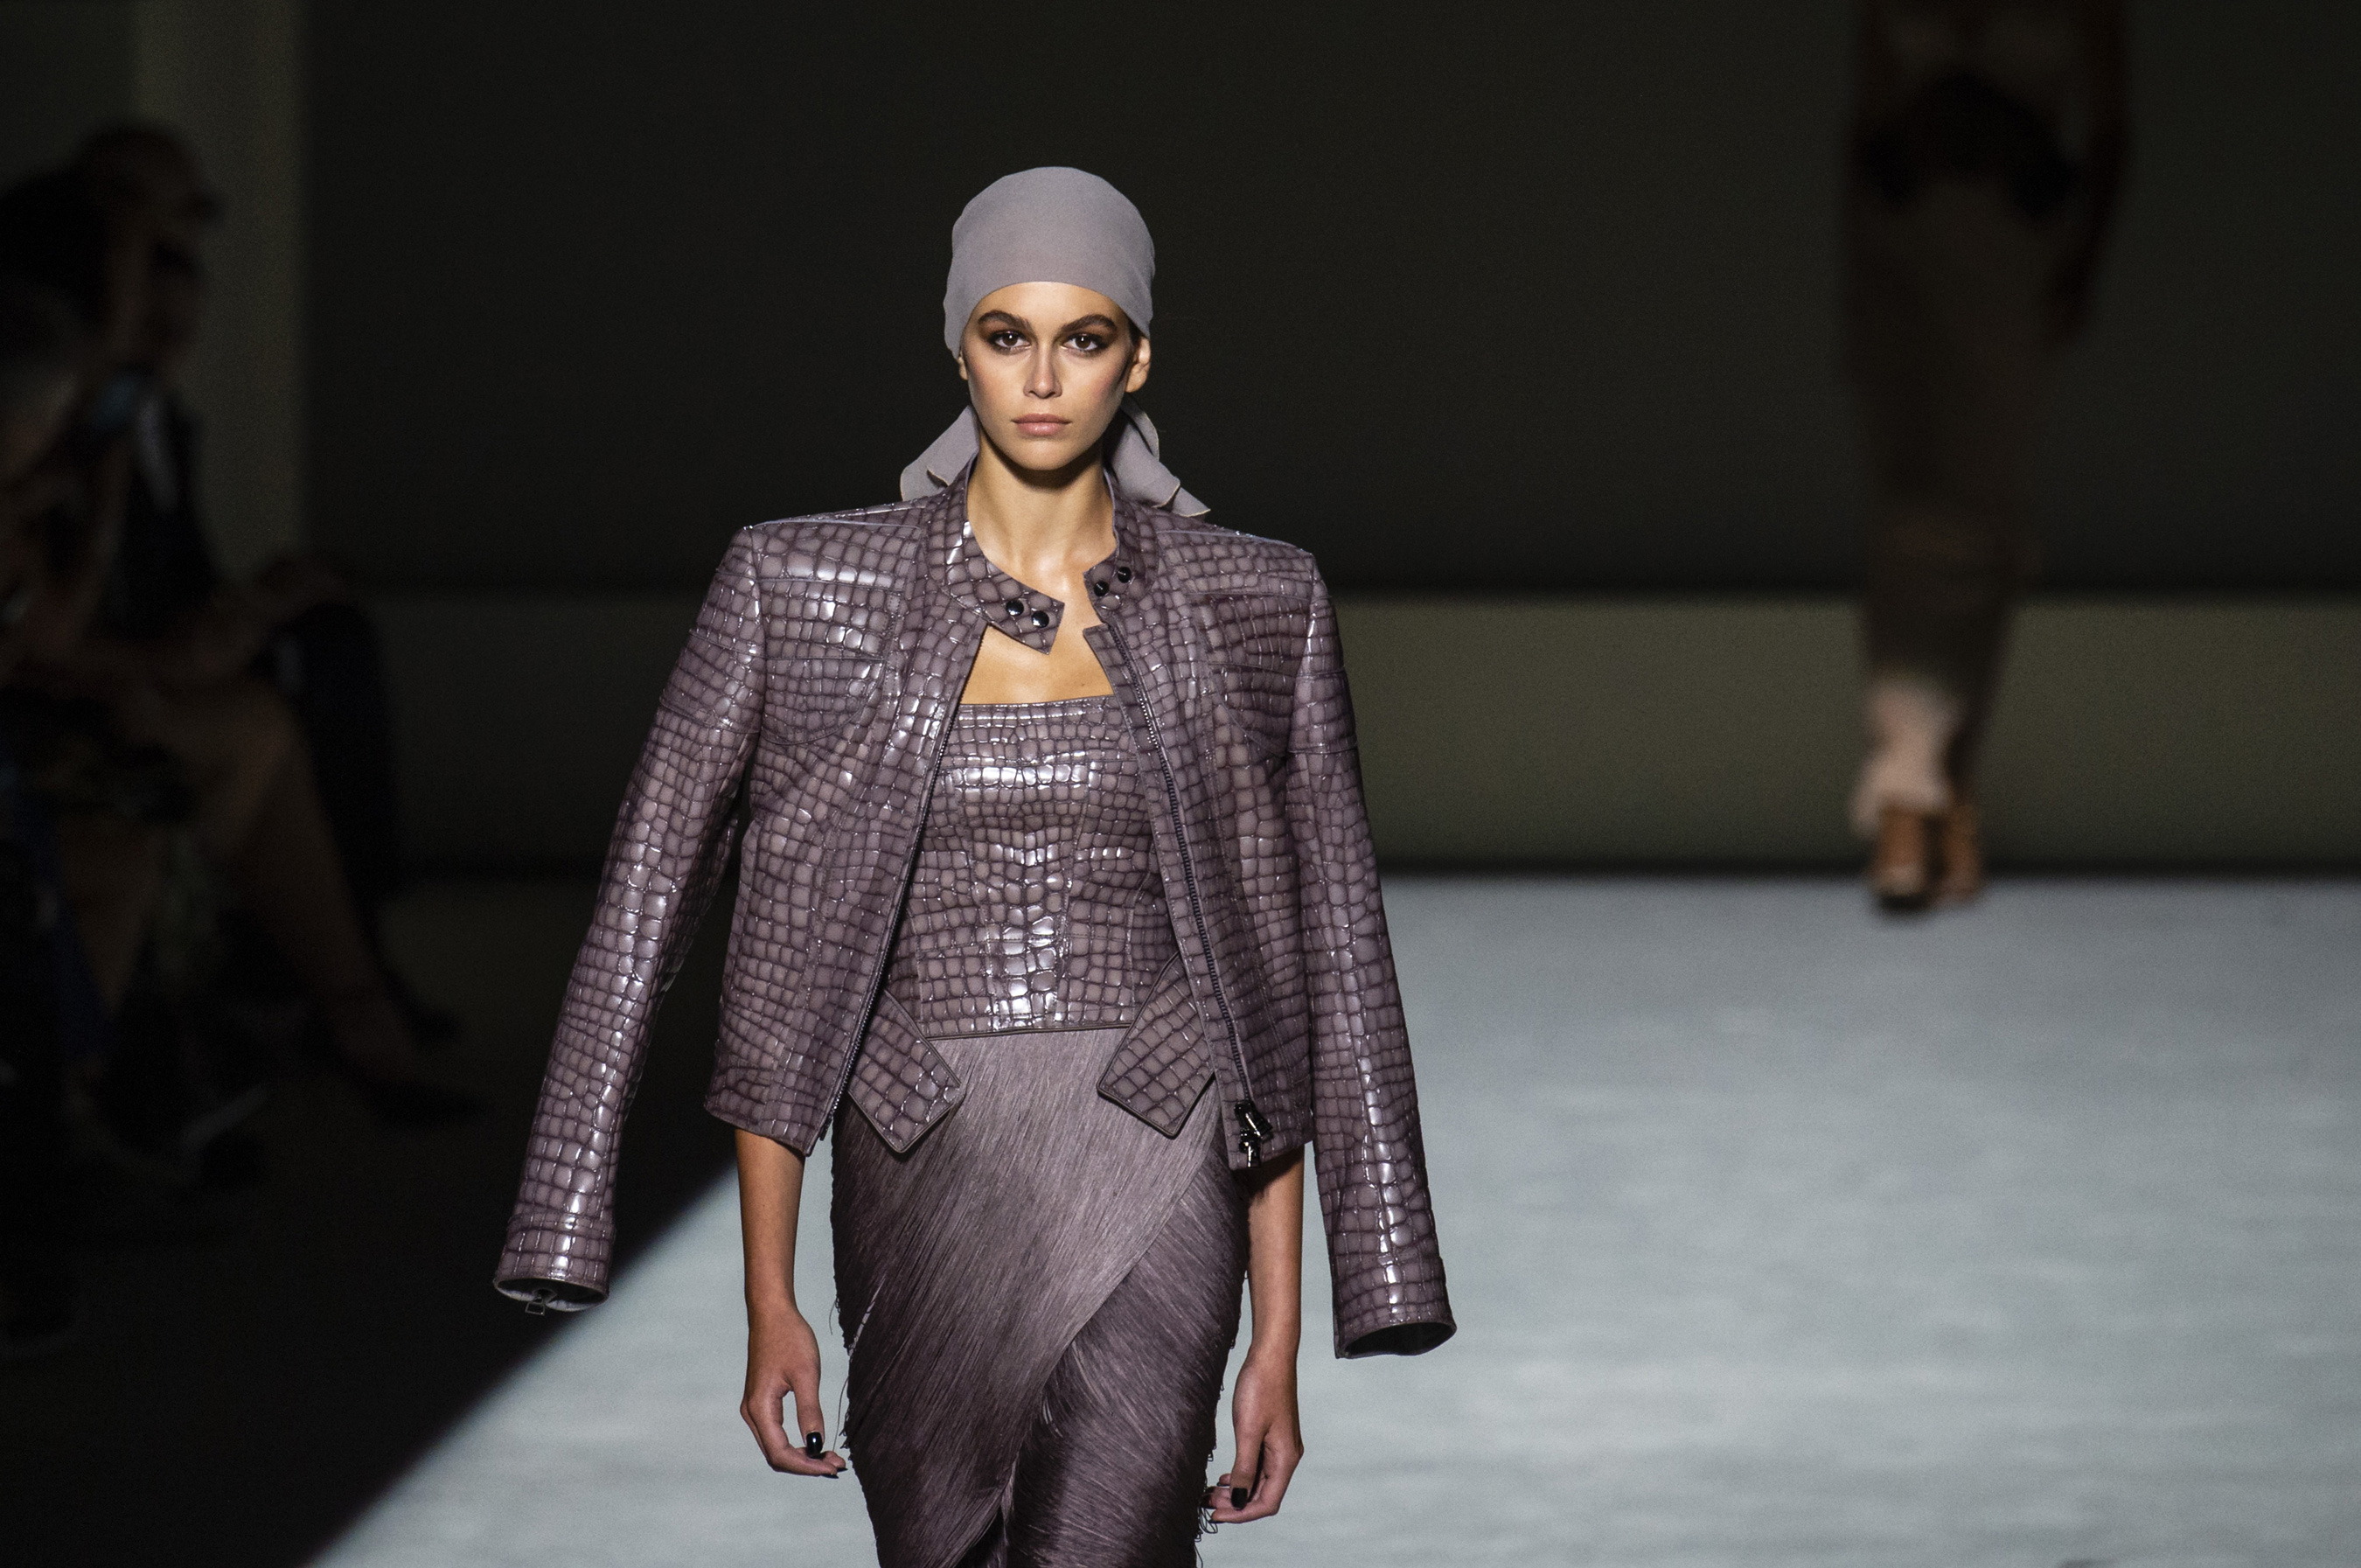 Top 10 New York Spring 2019 Collections and Fashion Shows